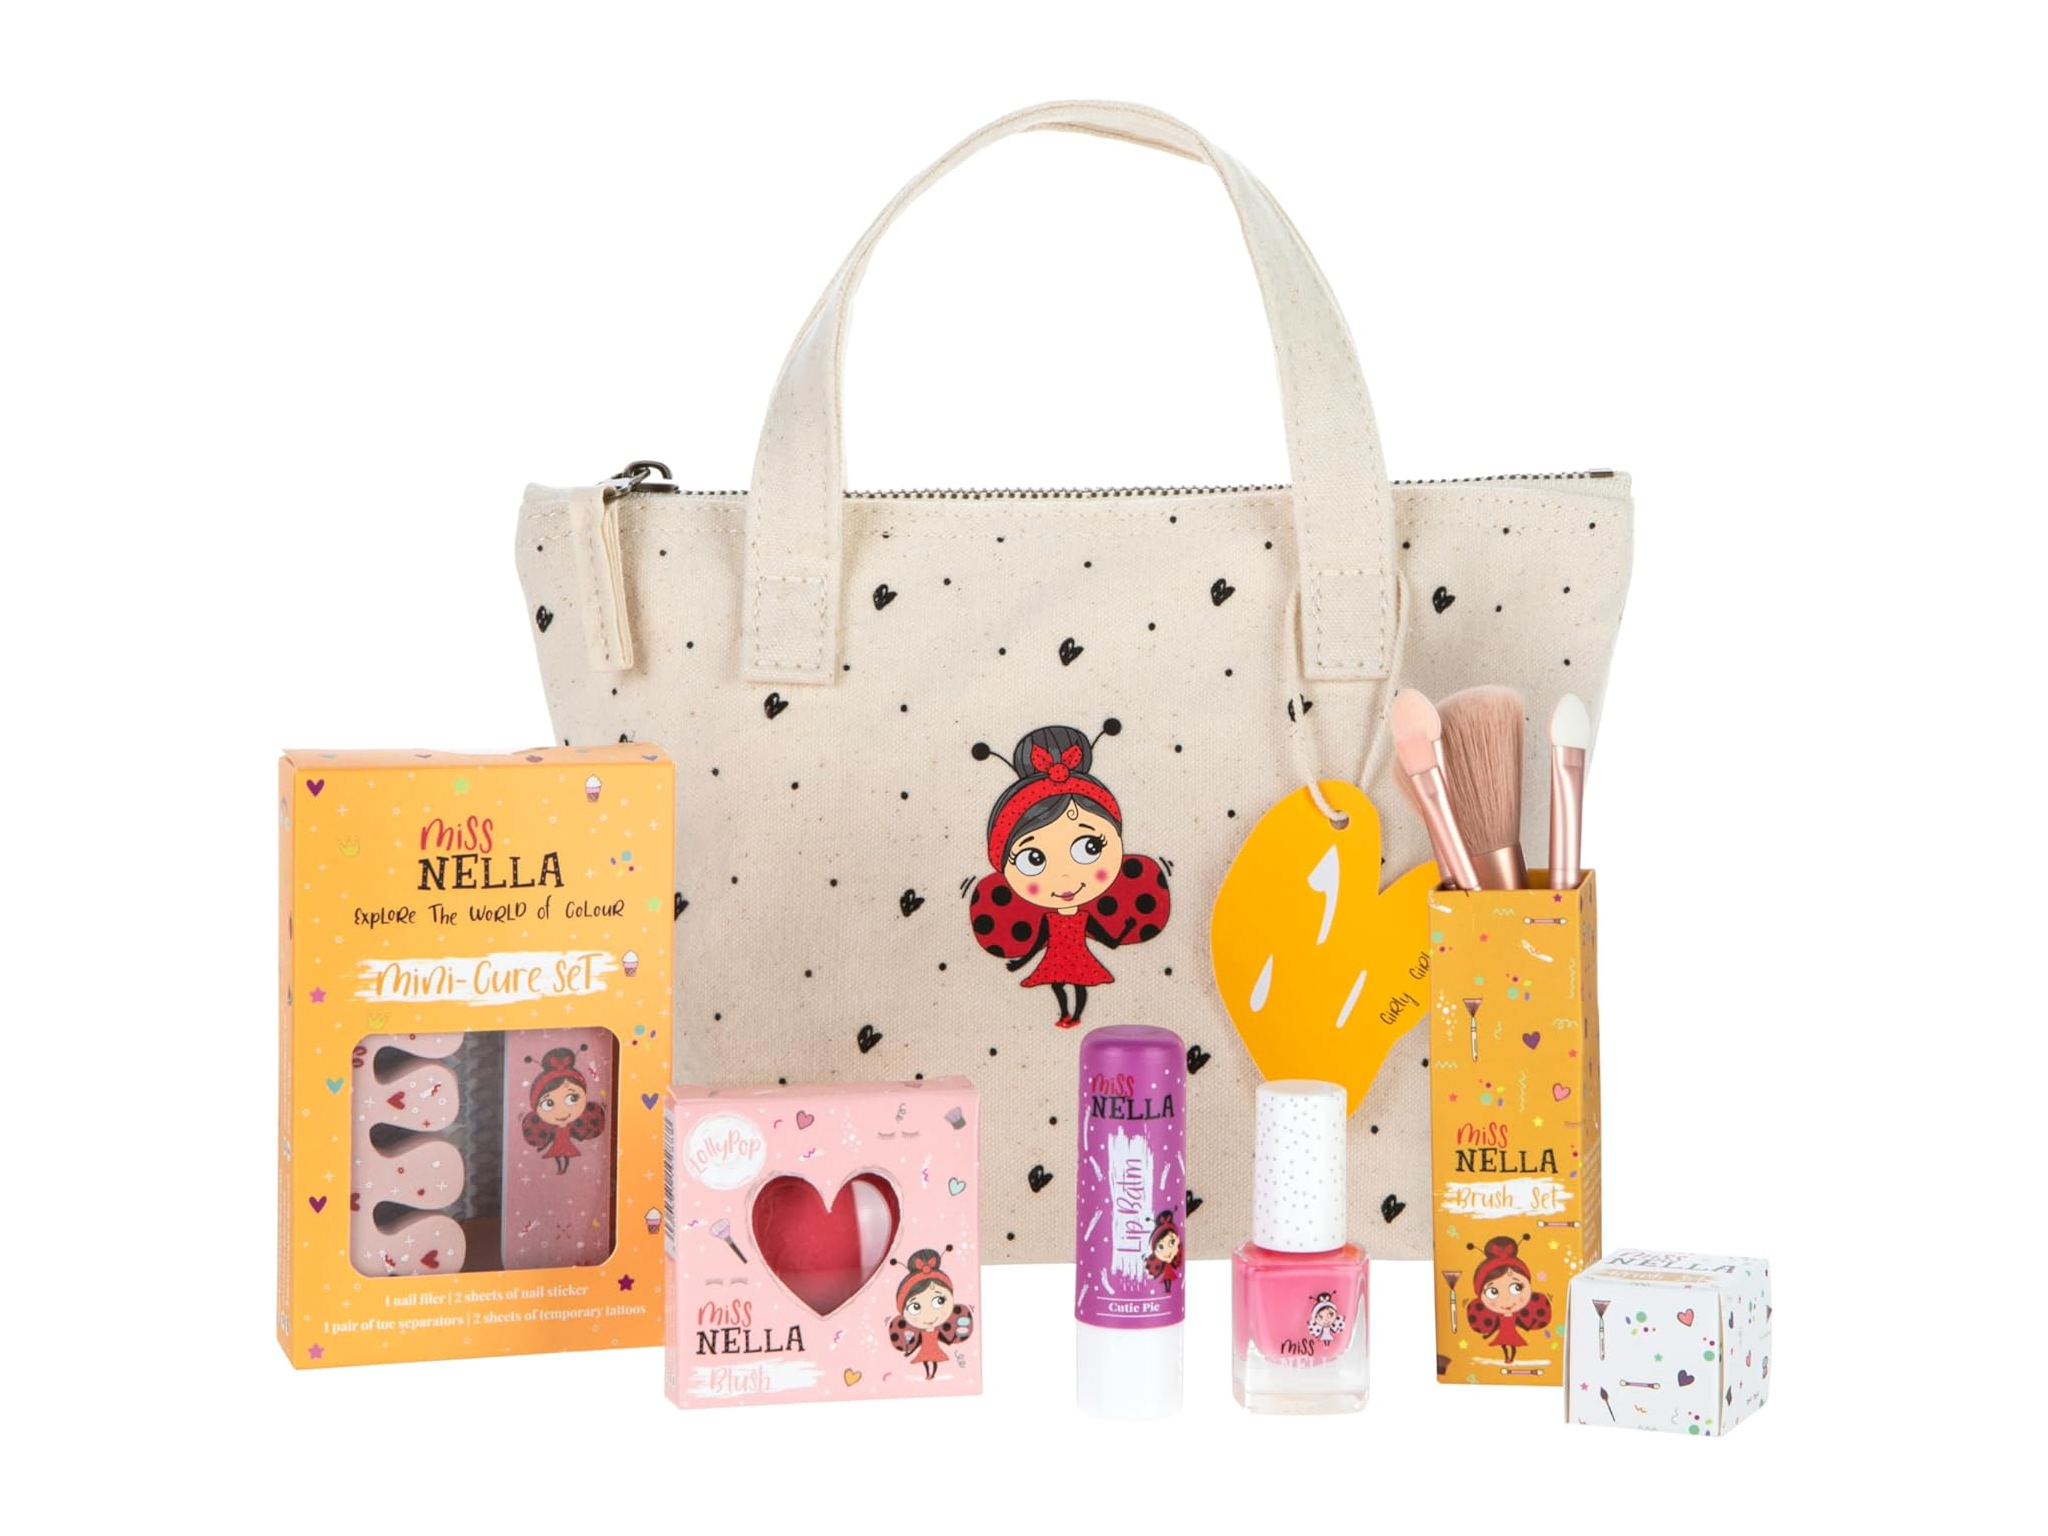 Miss-nella-best-gifts-for-8-year-olds-review-indybest